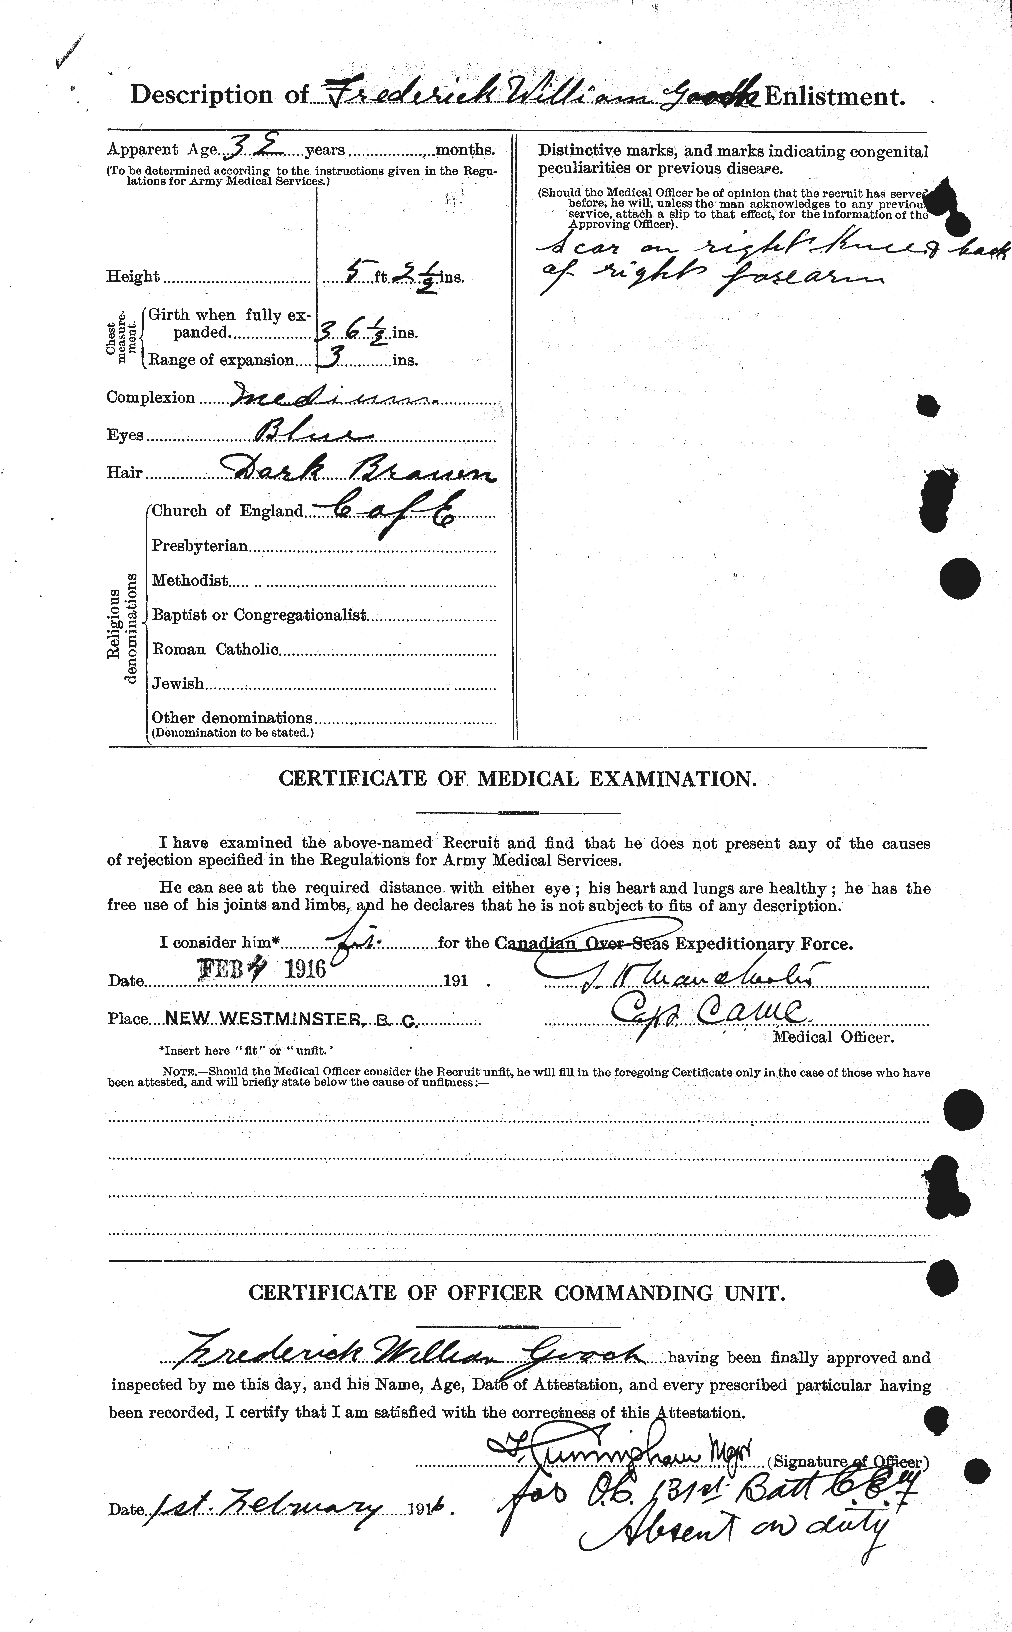 Personnel Records of the First World War - CEF 354903b